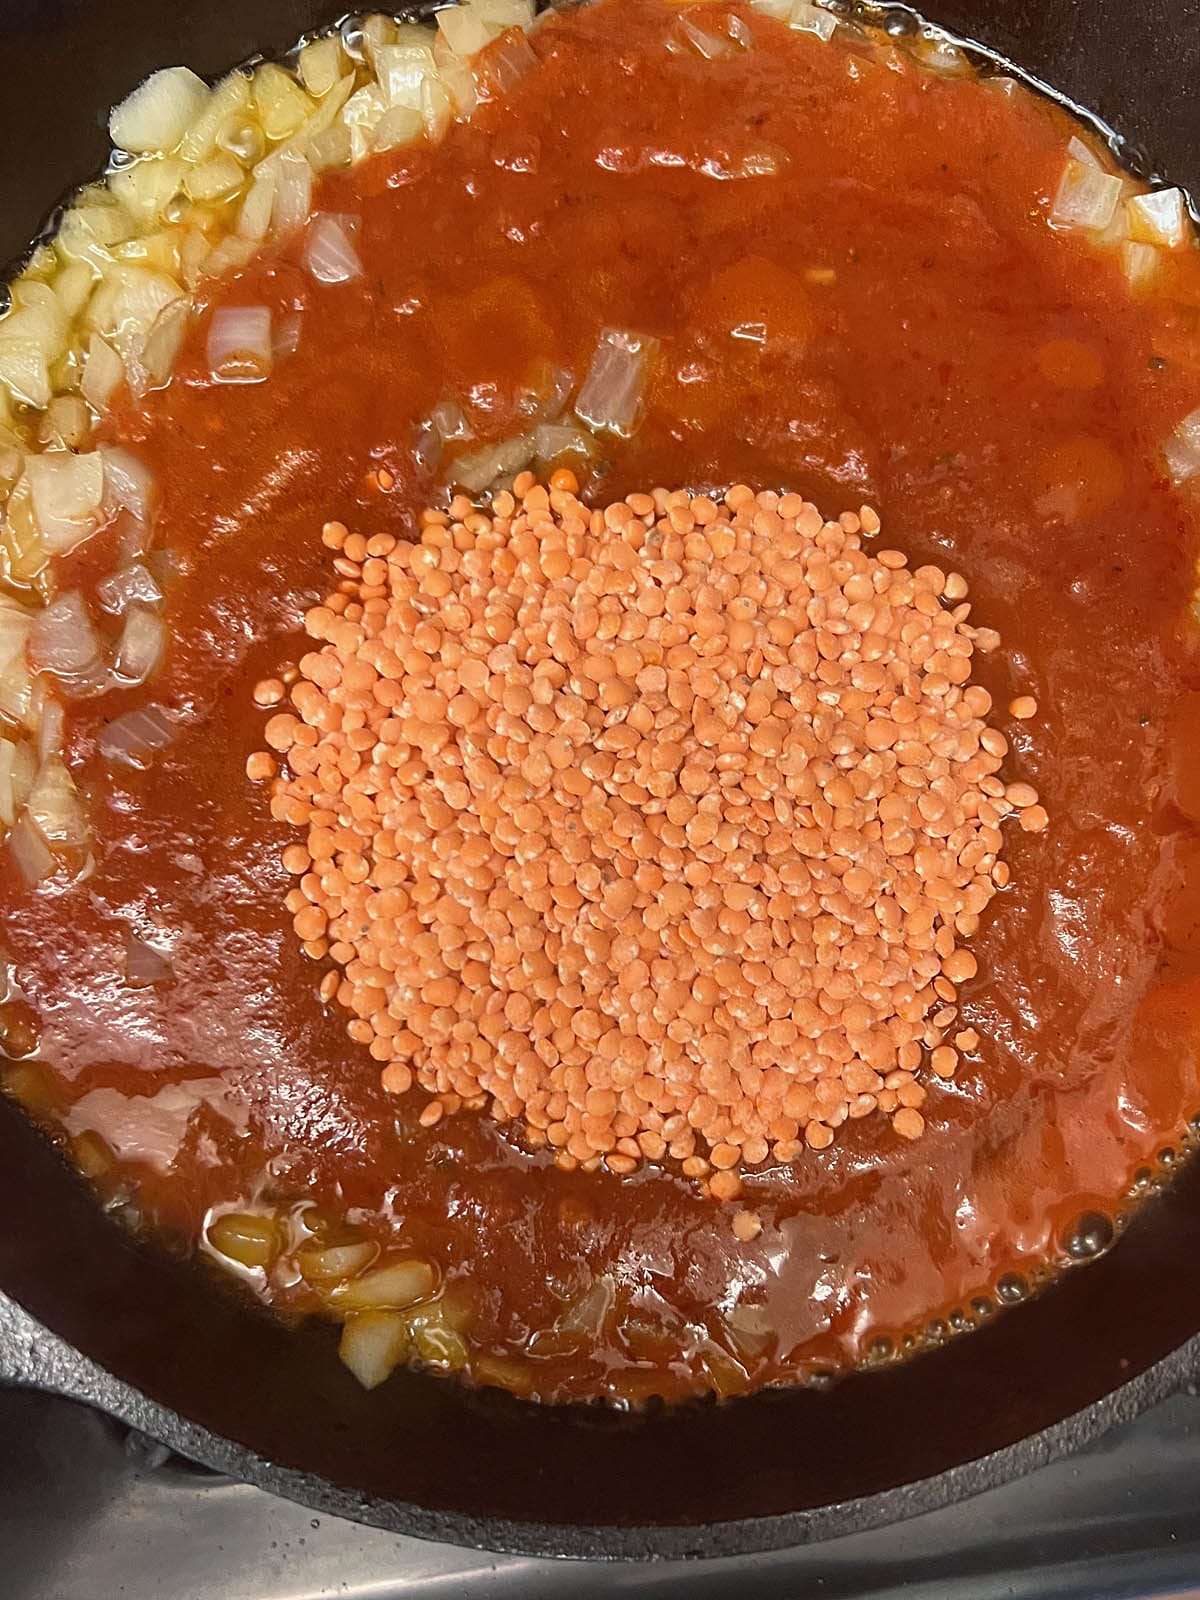 Lentils and marinara sauce added to the skillet.